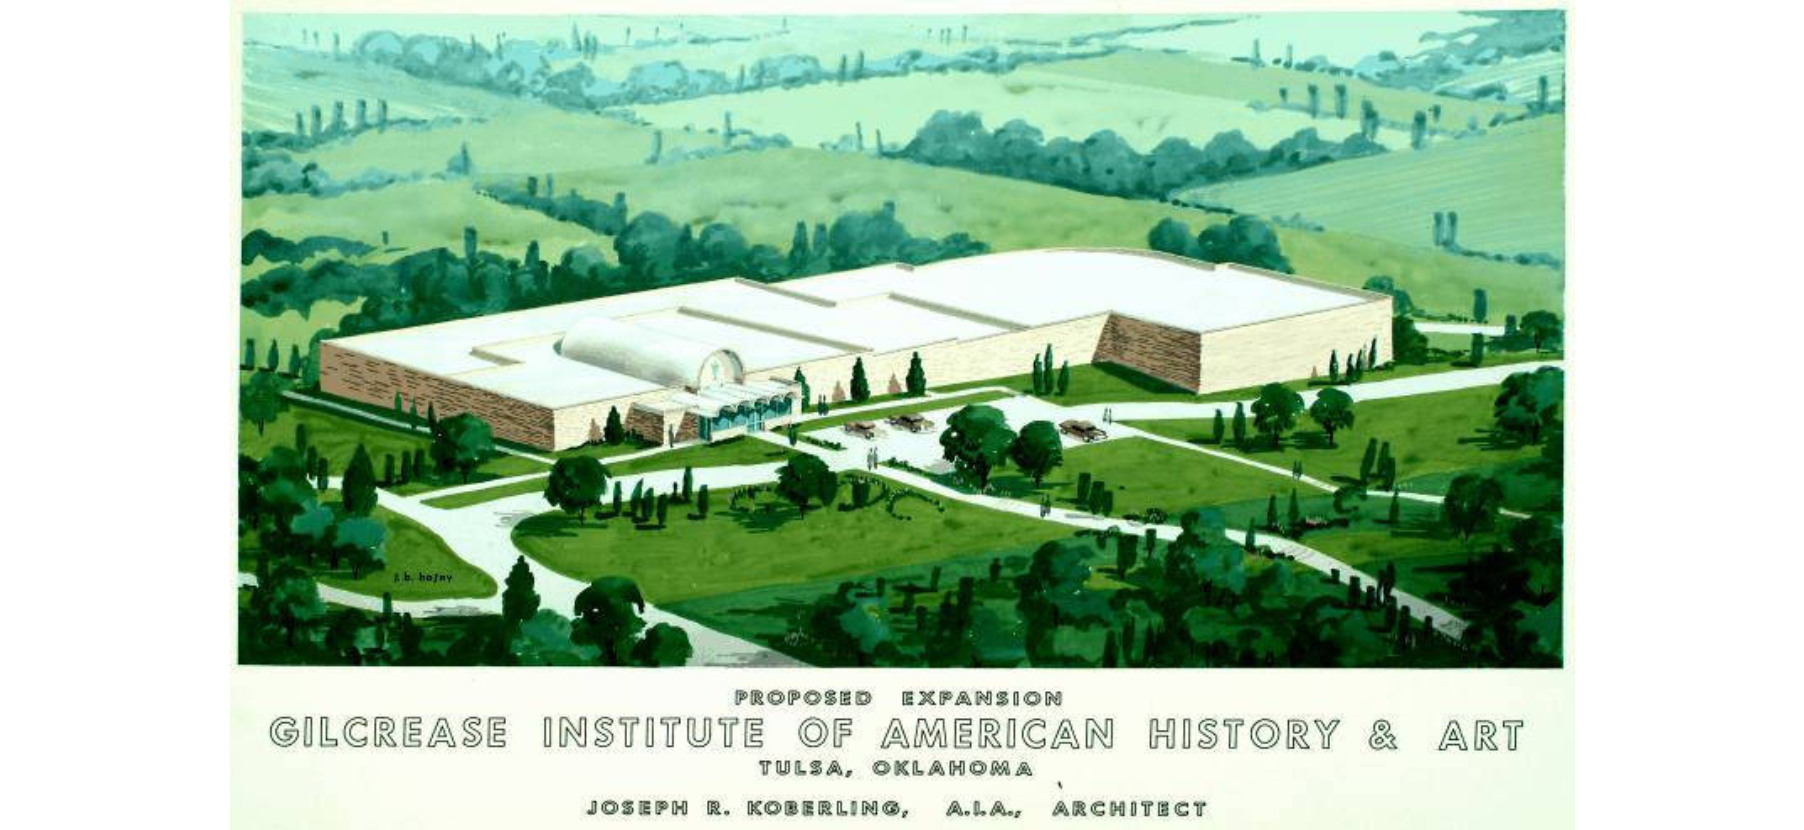 Gilcrease_Proposed_Expansion-Koberling-1961.png